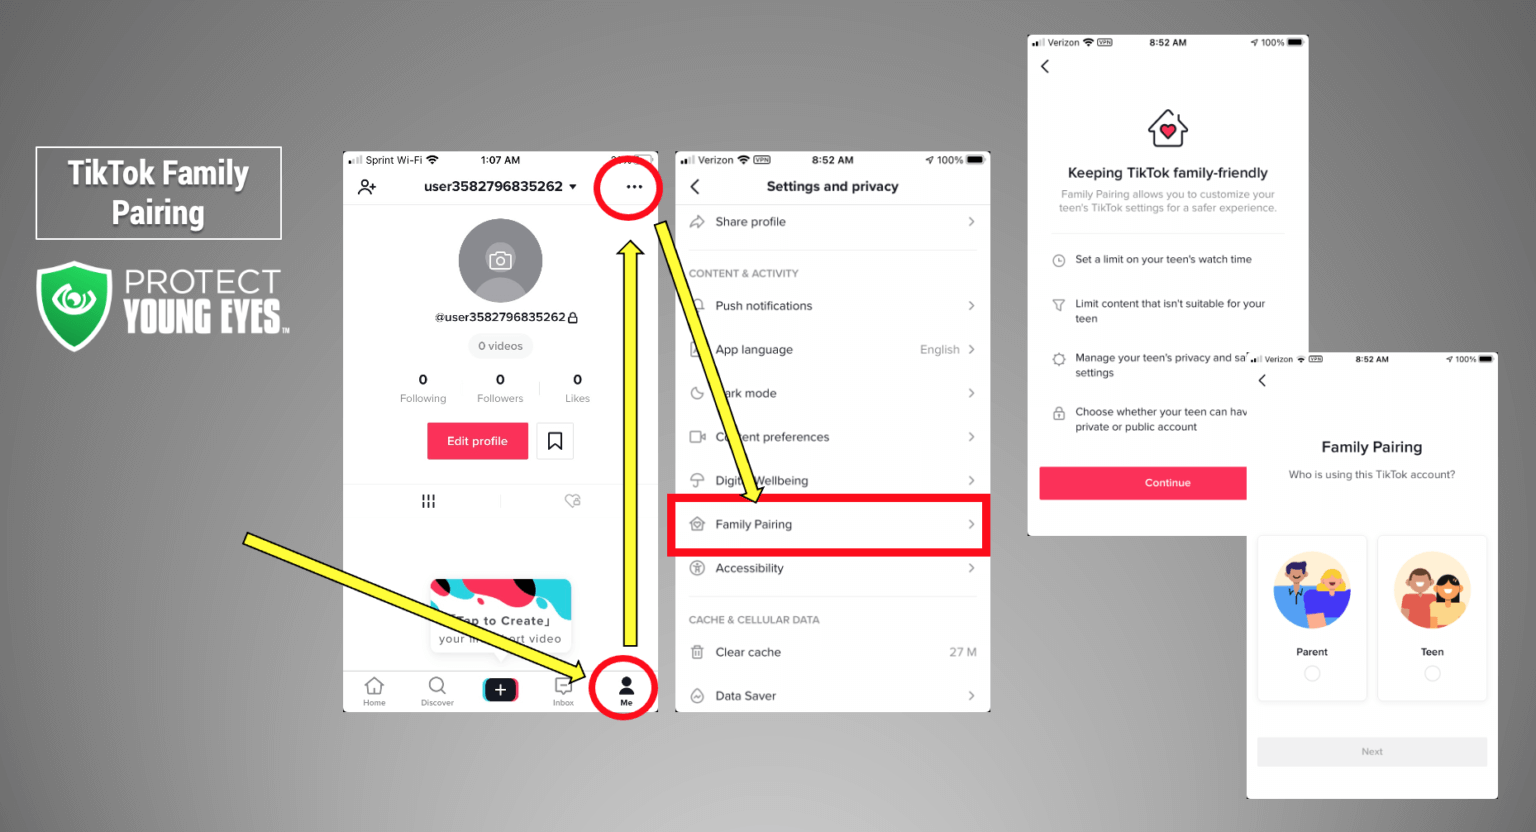 New TikTok Parental Controls Released - Protect Young Eyes